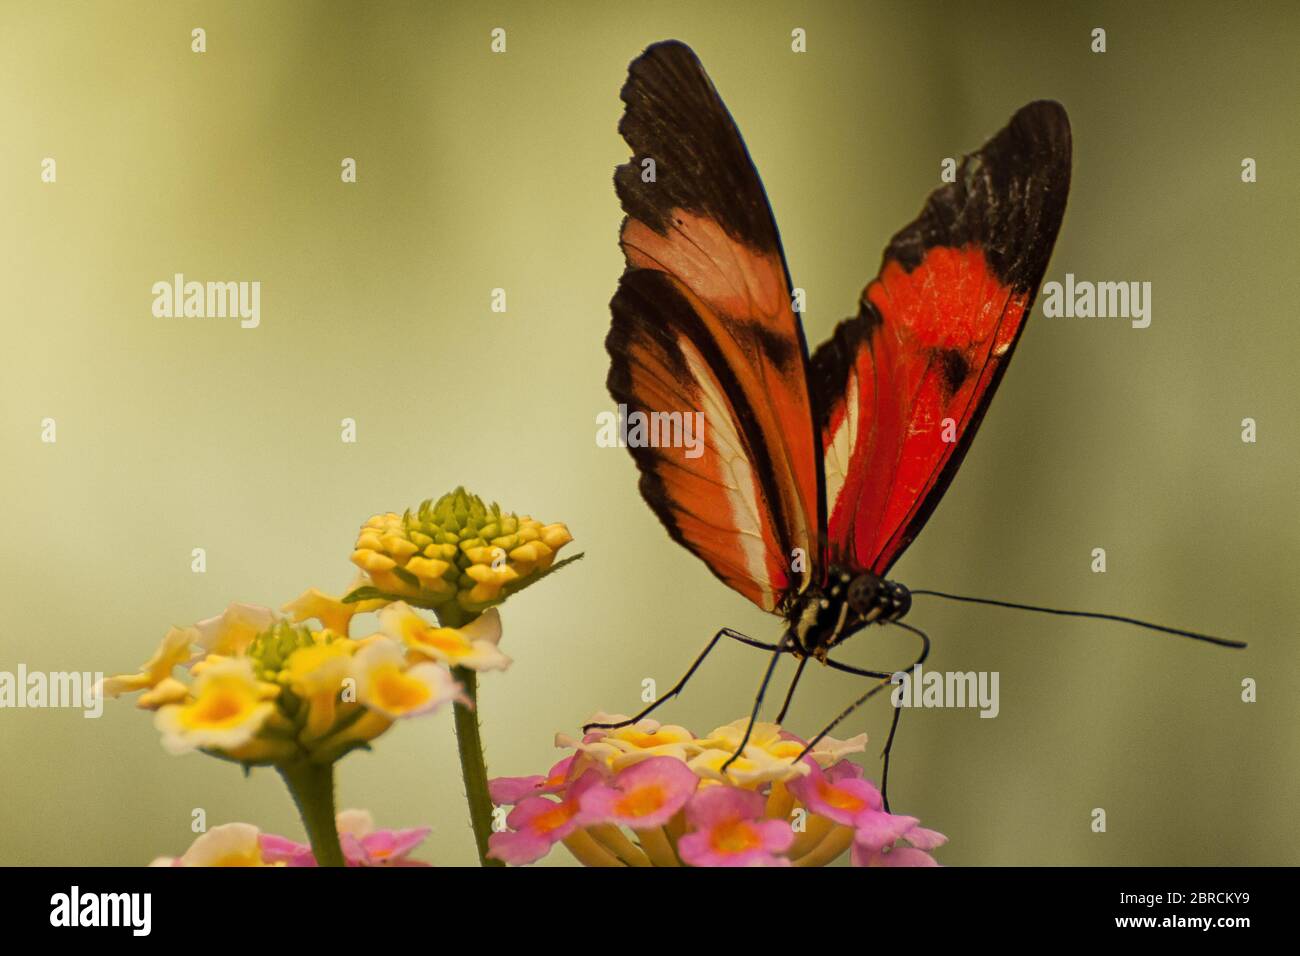 A butterfly on a flower Stock Photo